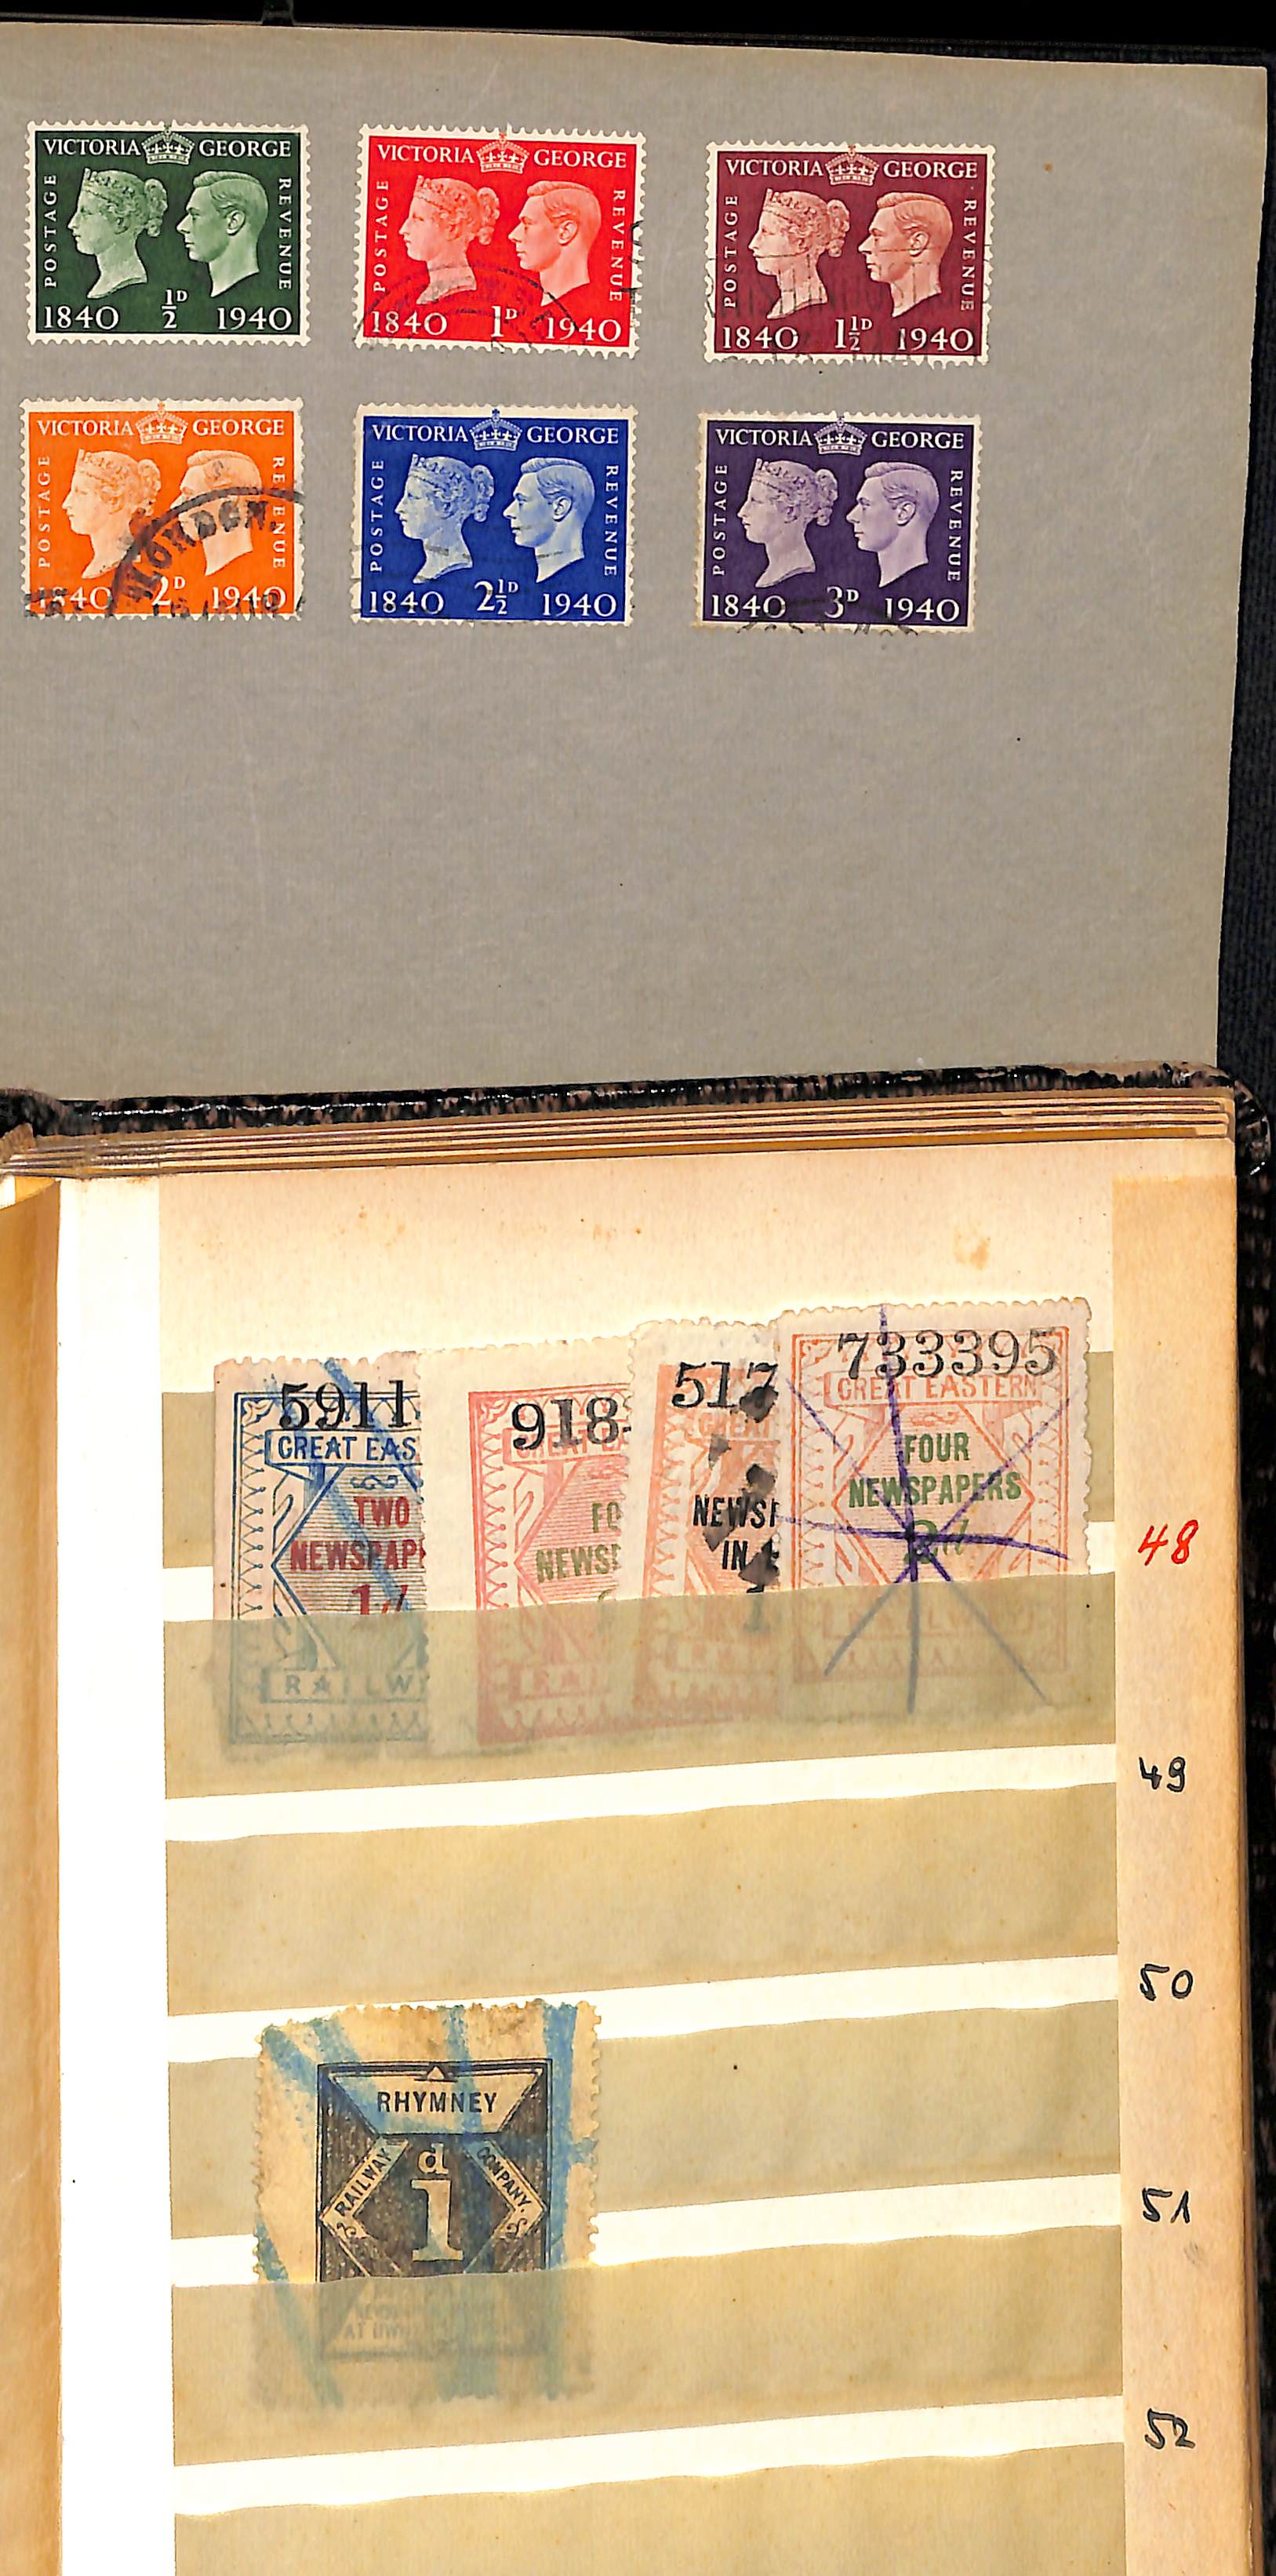 QV-QEII Stamps including 1840 2d and 1891 £1 (both with faults), 1958 3d tete-beche strip, 1969 £1 - Image 13 of 22